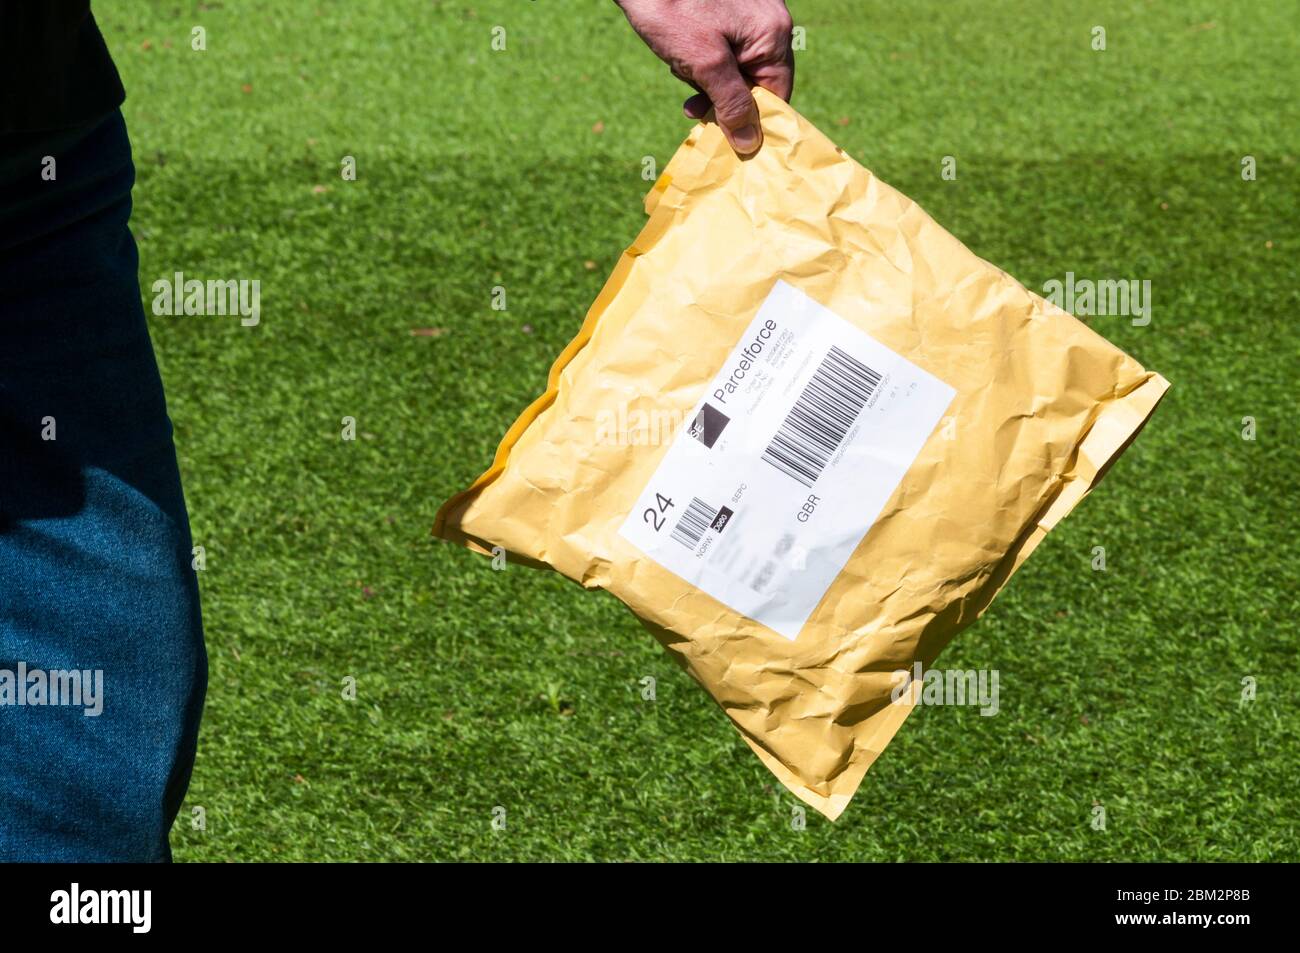 Woman holding a parcel delivery very carefully during 2020 COVID-19 Coronavirus pandemic. Stock Photo